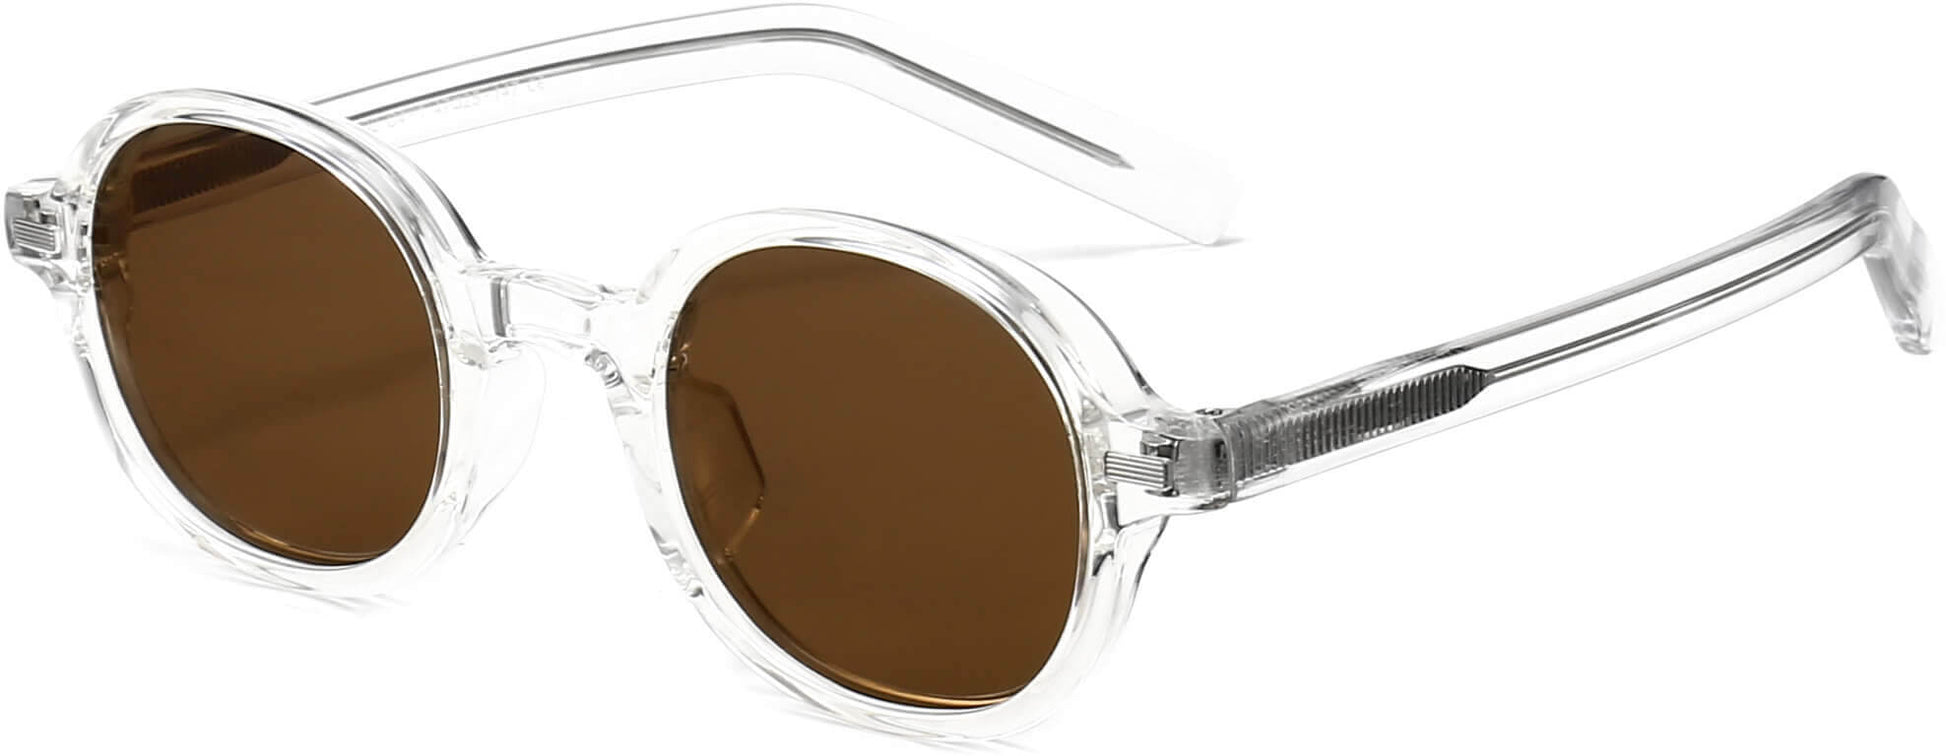 Timothy Clear Plastic Sunglasses from ANRRI, angle view